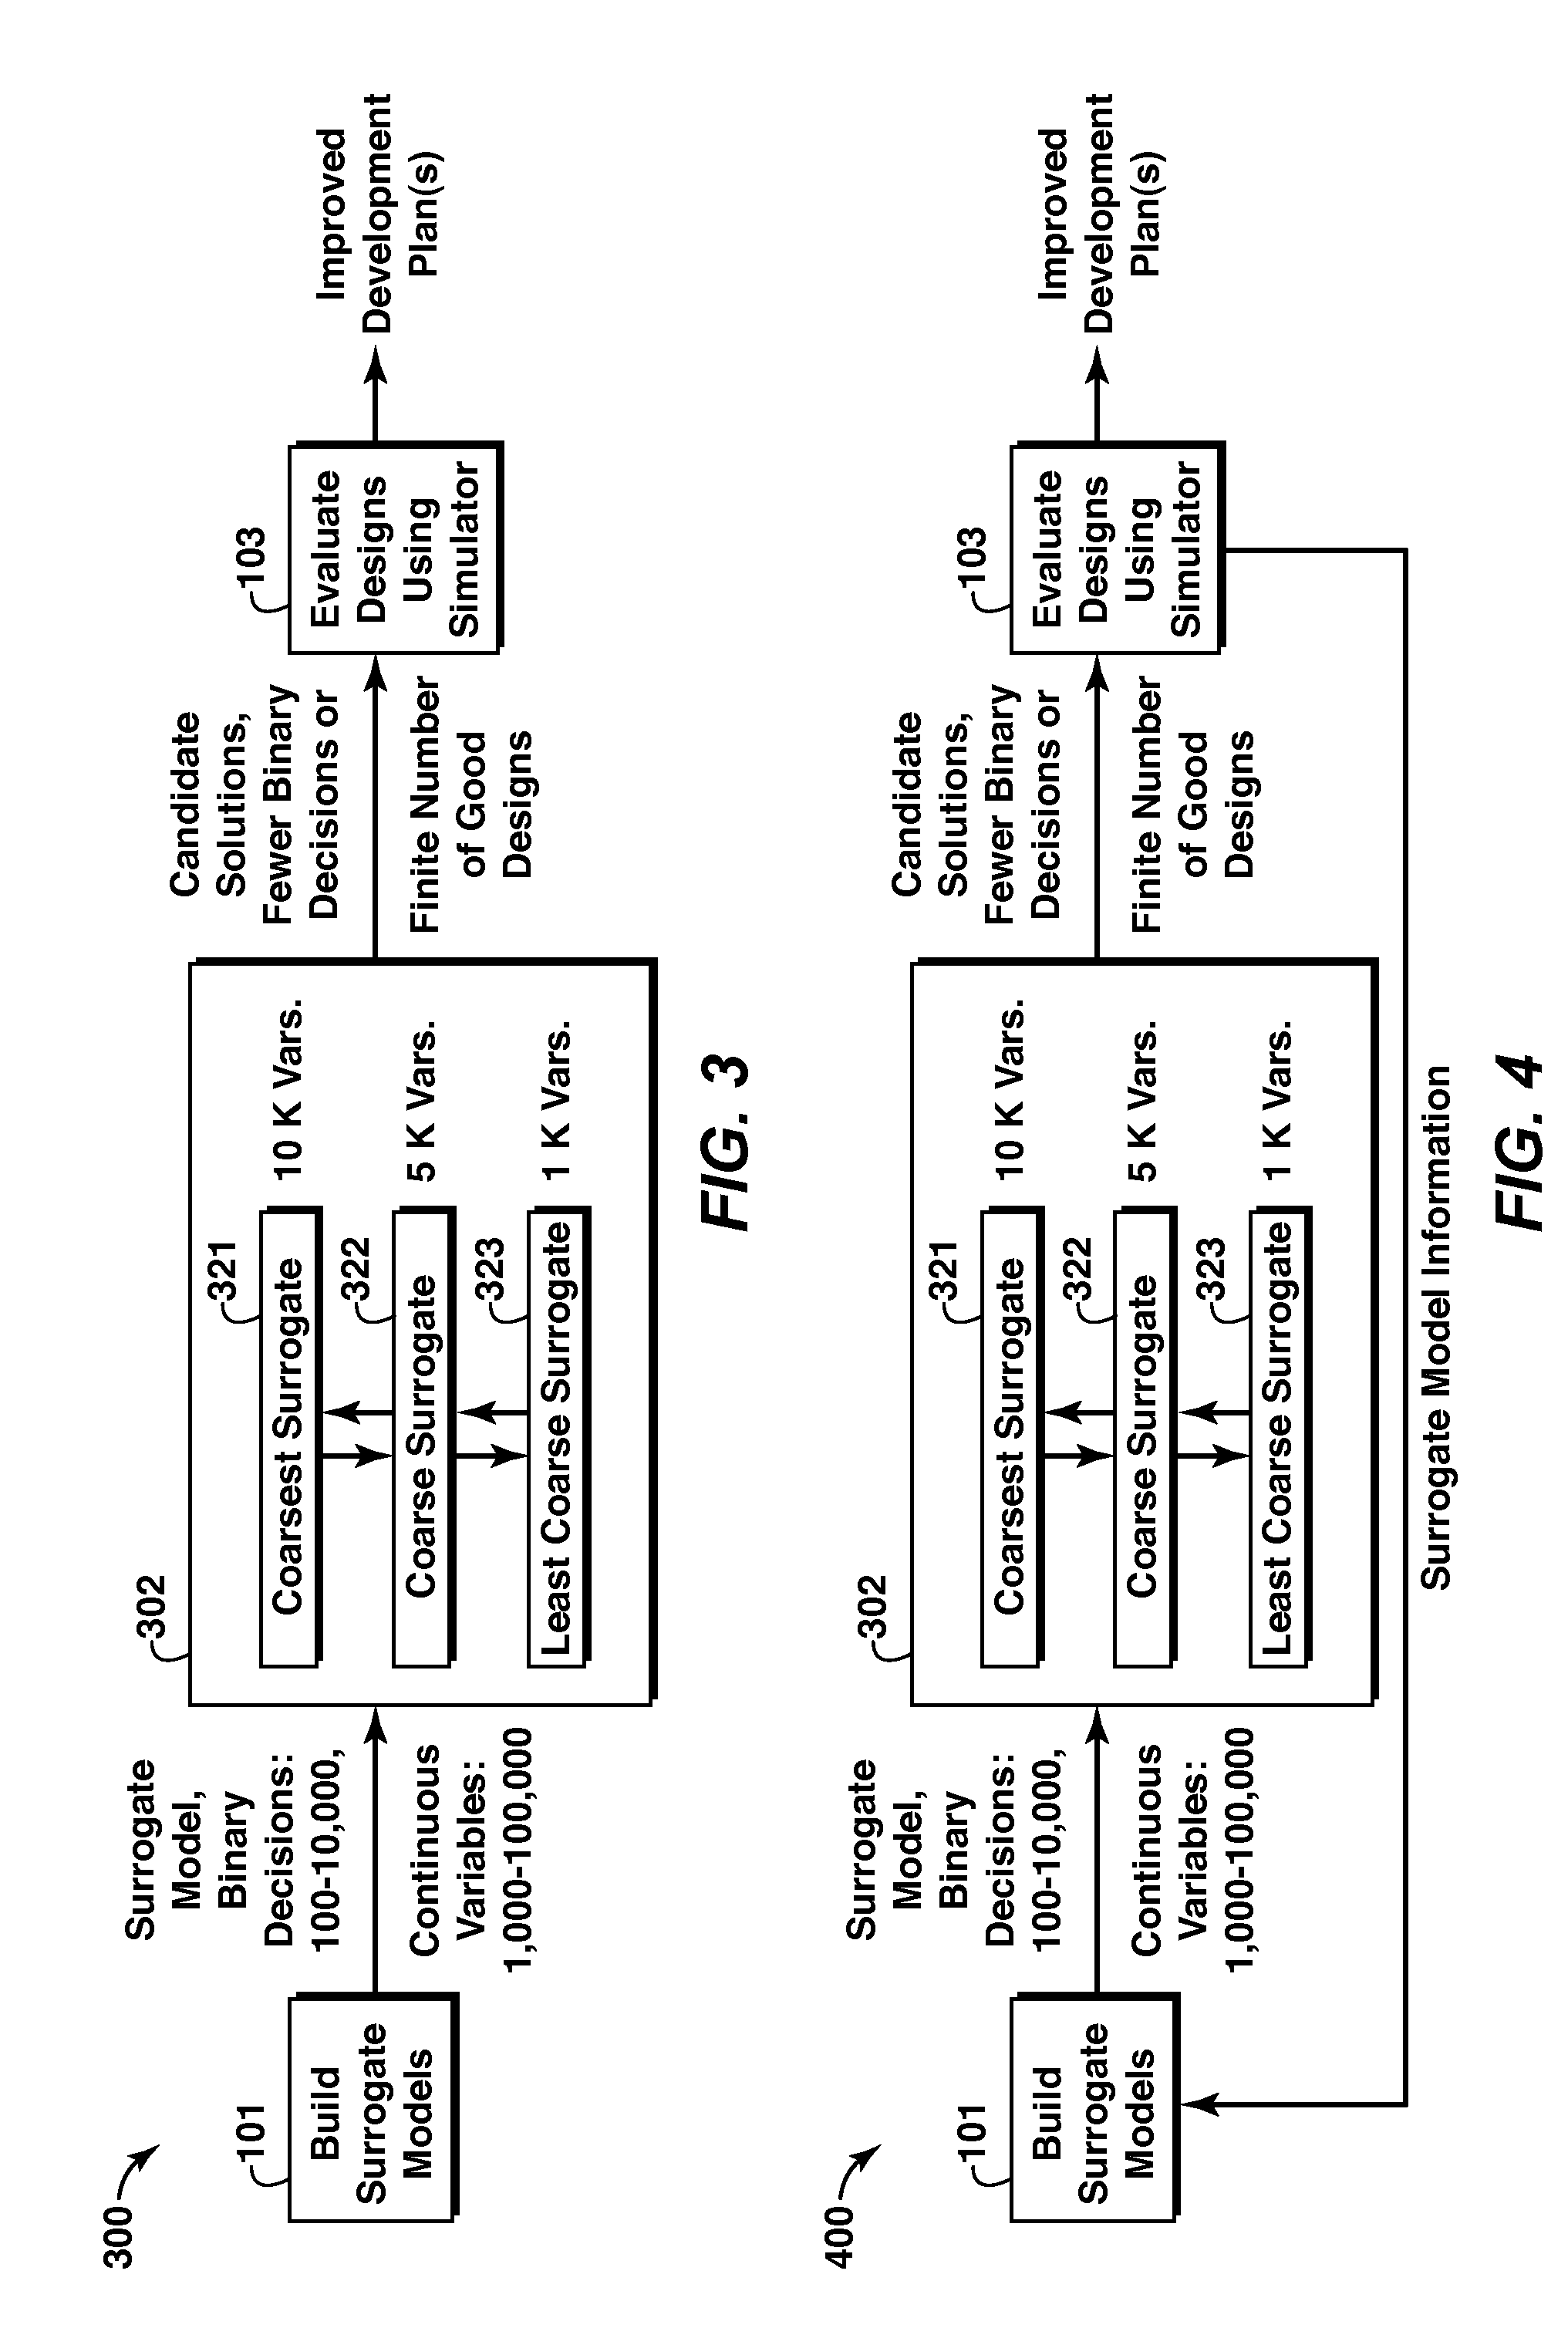 Systems and methods for reservoir development and management optimization